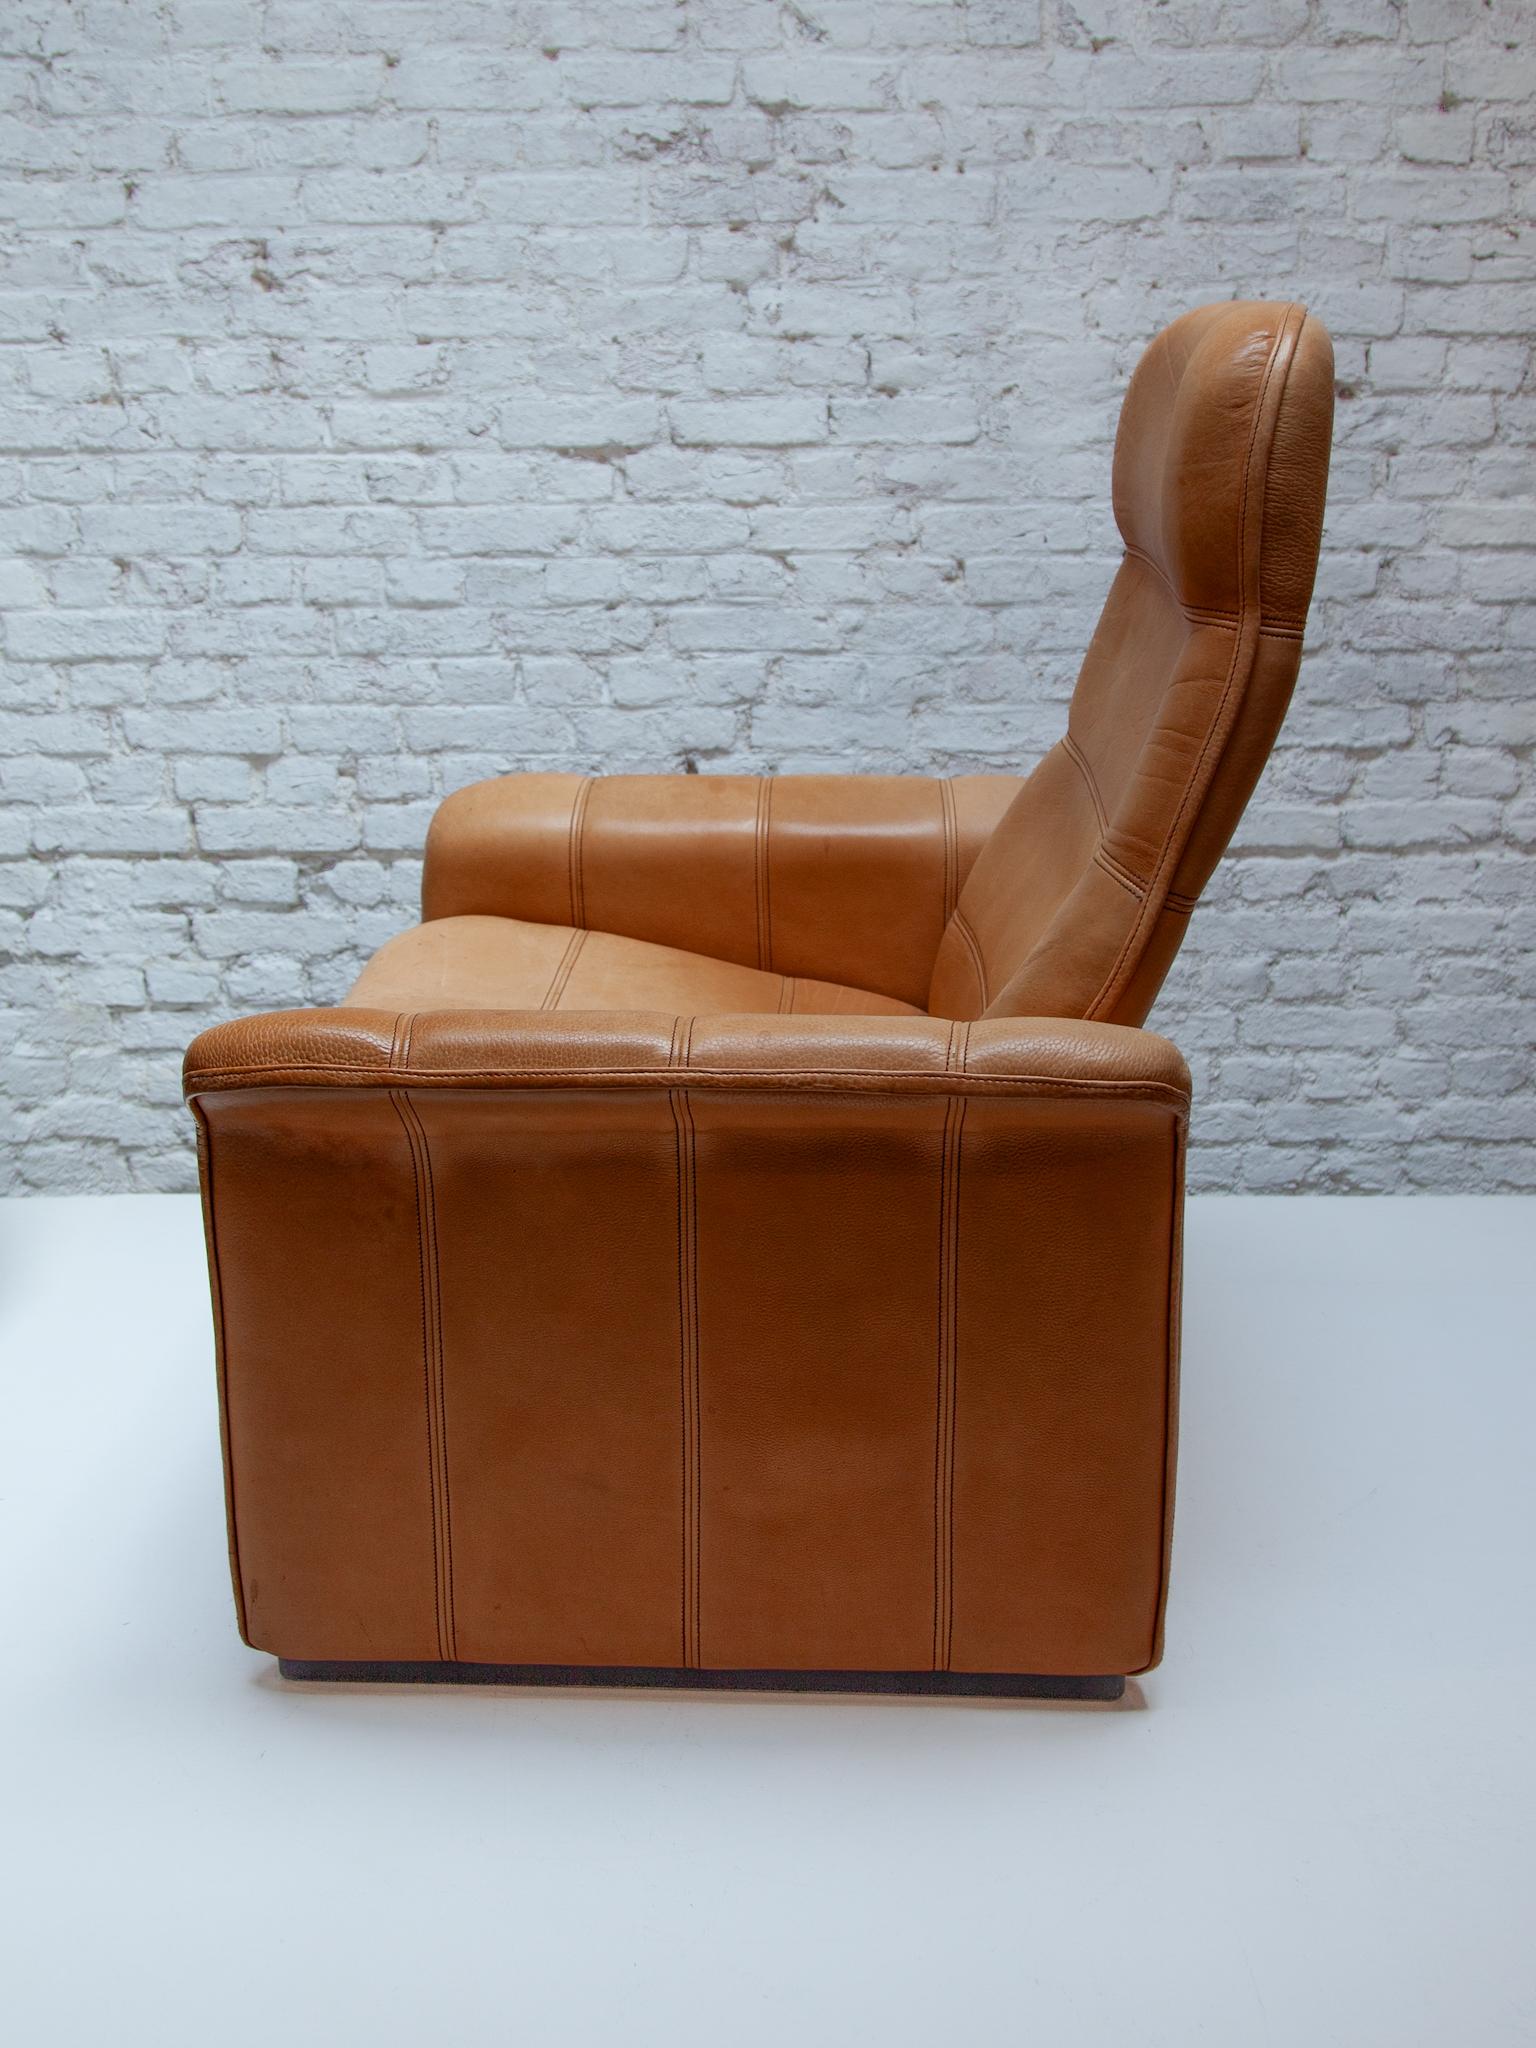 DS-50 Camel Buffalo Neck Leather Lounge Chair & Footstool by De Sede, 1970s For Sale 1